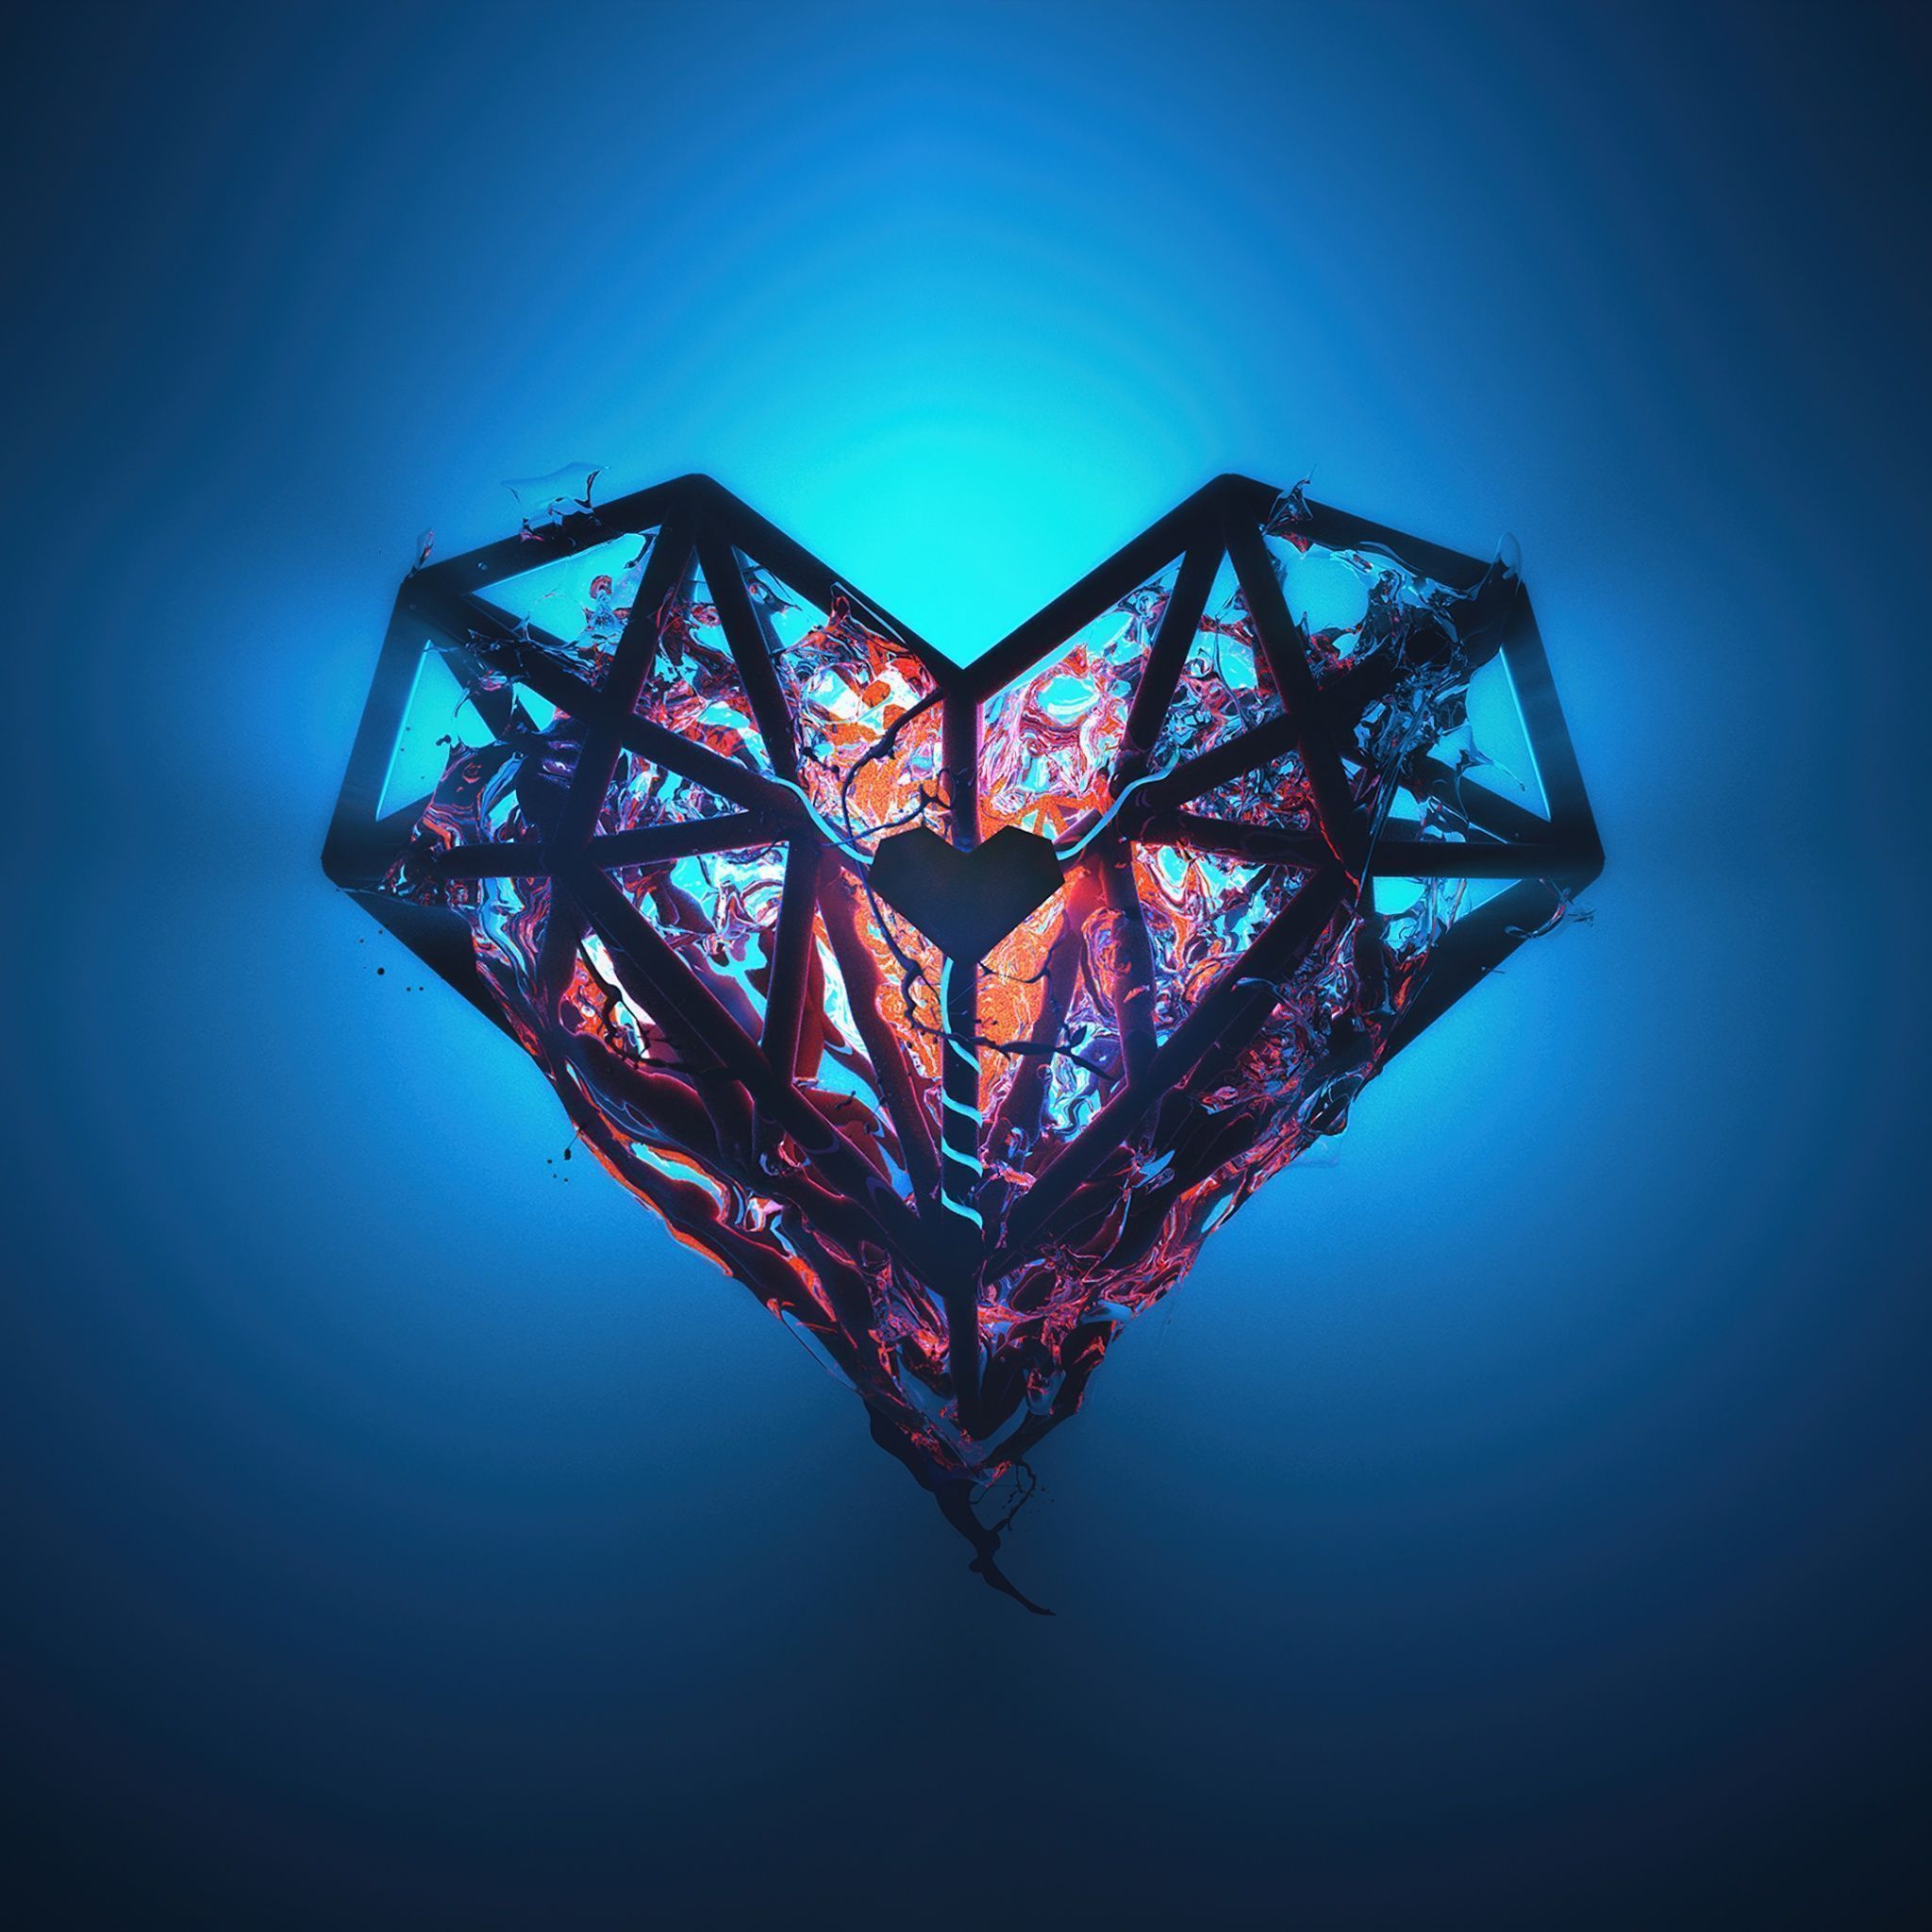 A digital artwork of a heart shape made up of many smaller geometric shapes. - Low poly